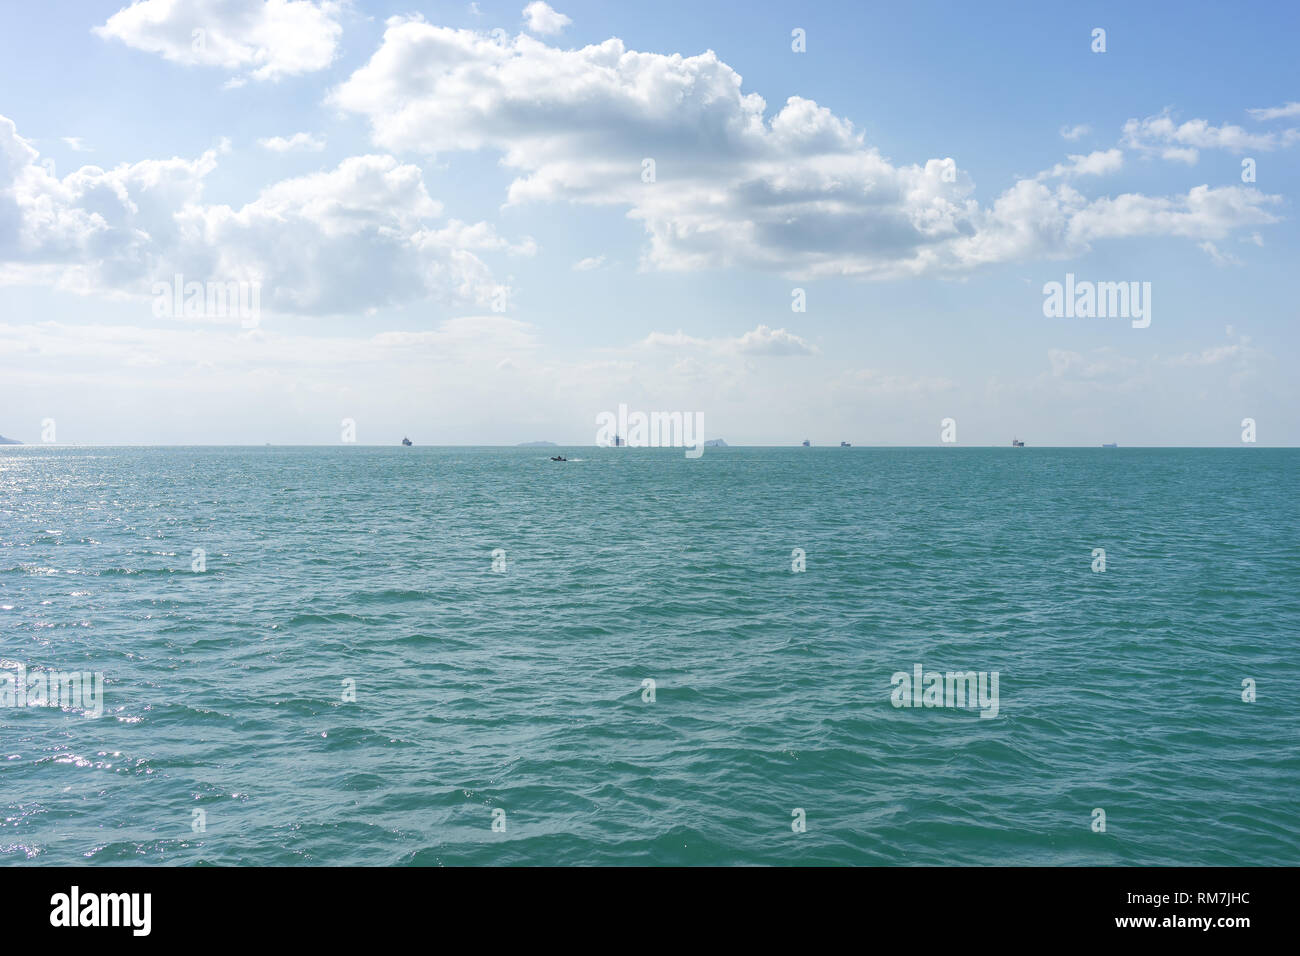 Ships in the raid on the horizon under the clouds Stock Photo